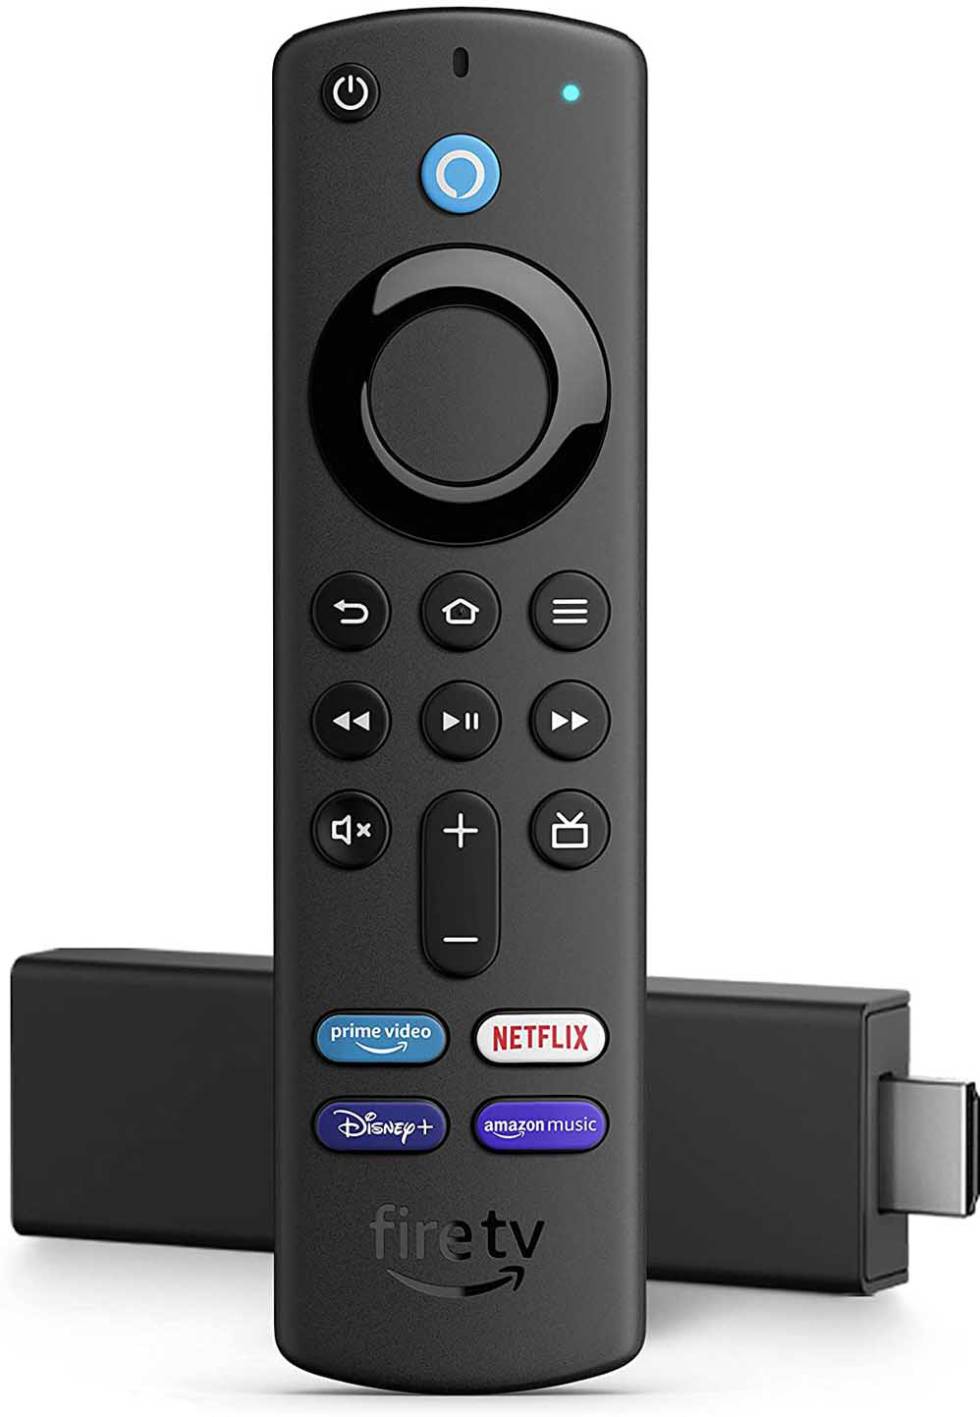 Fire TV Stick player with remote control